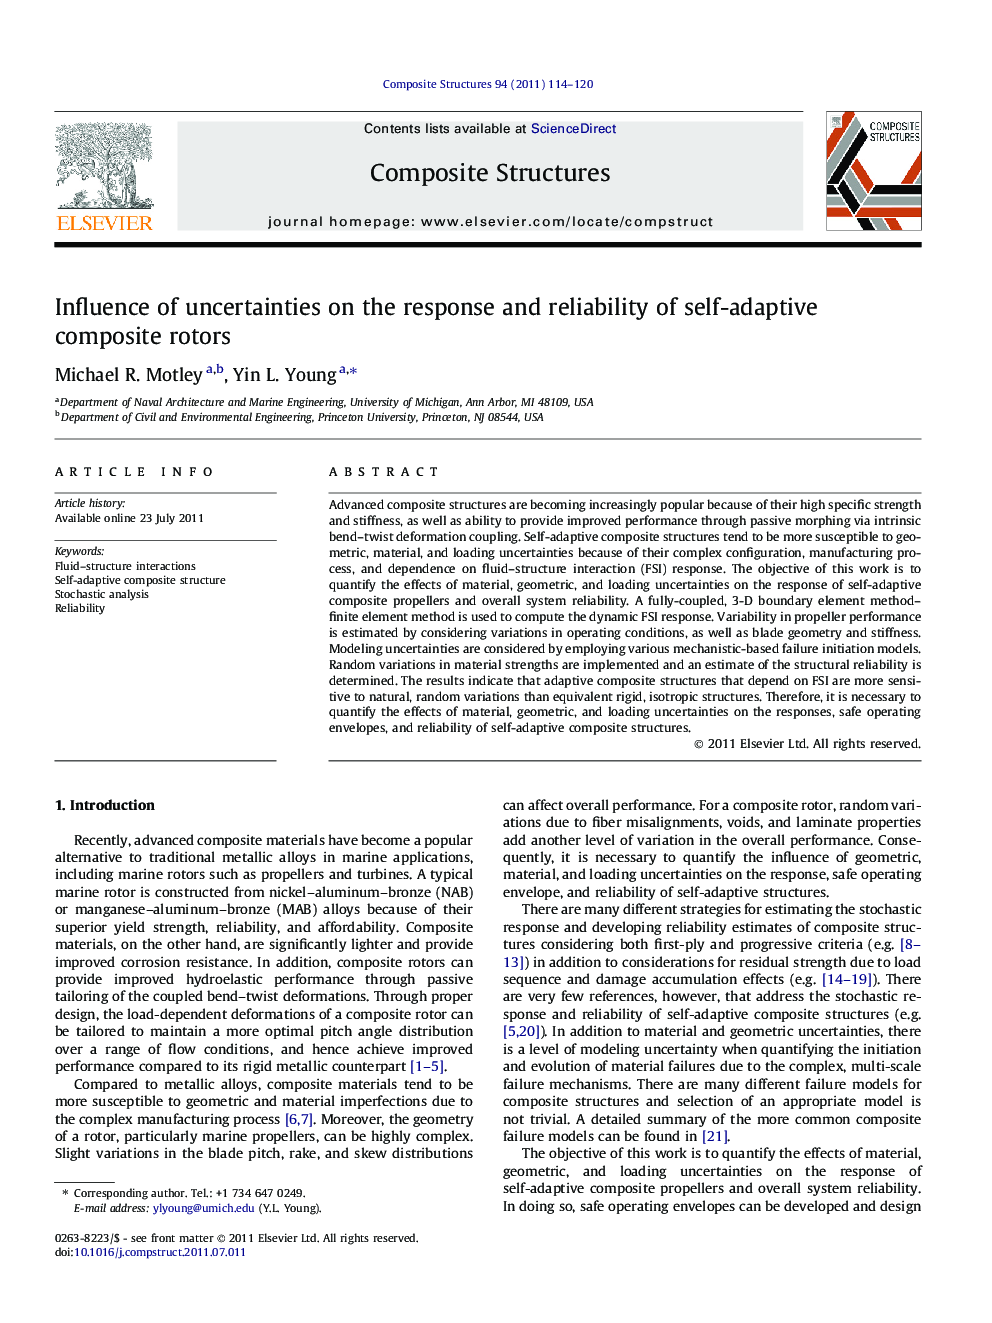 Influence of uncertainties on the response and reliability of self-adaptive composite rotors